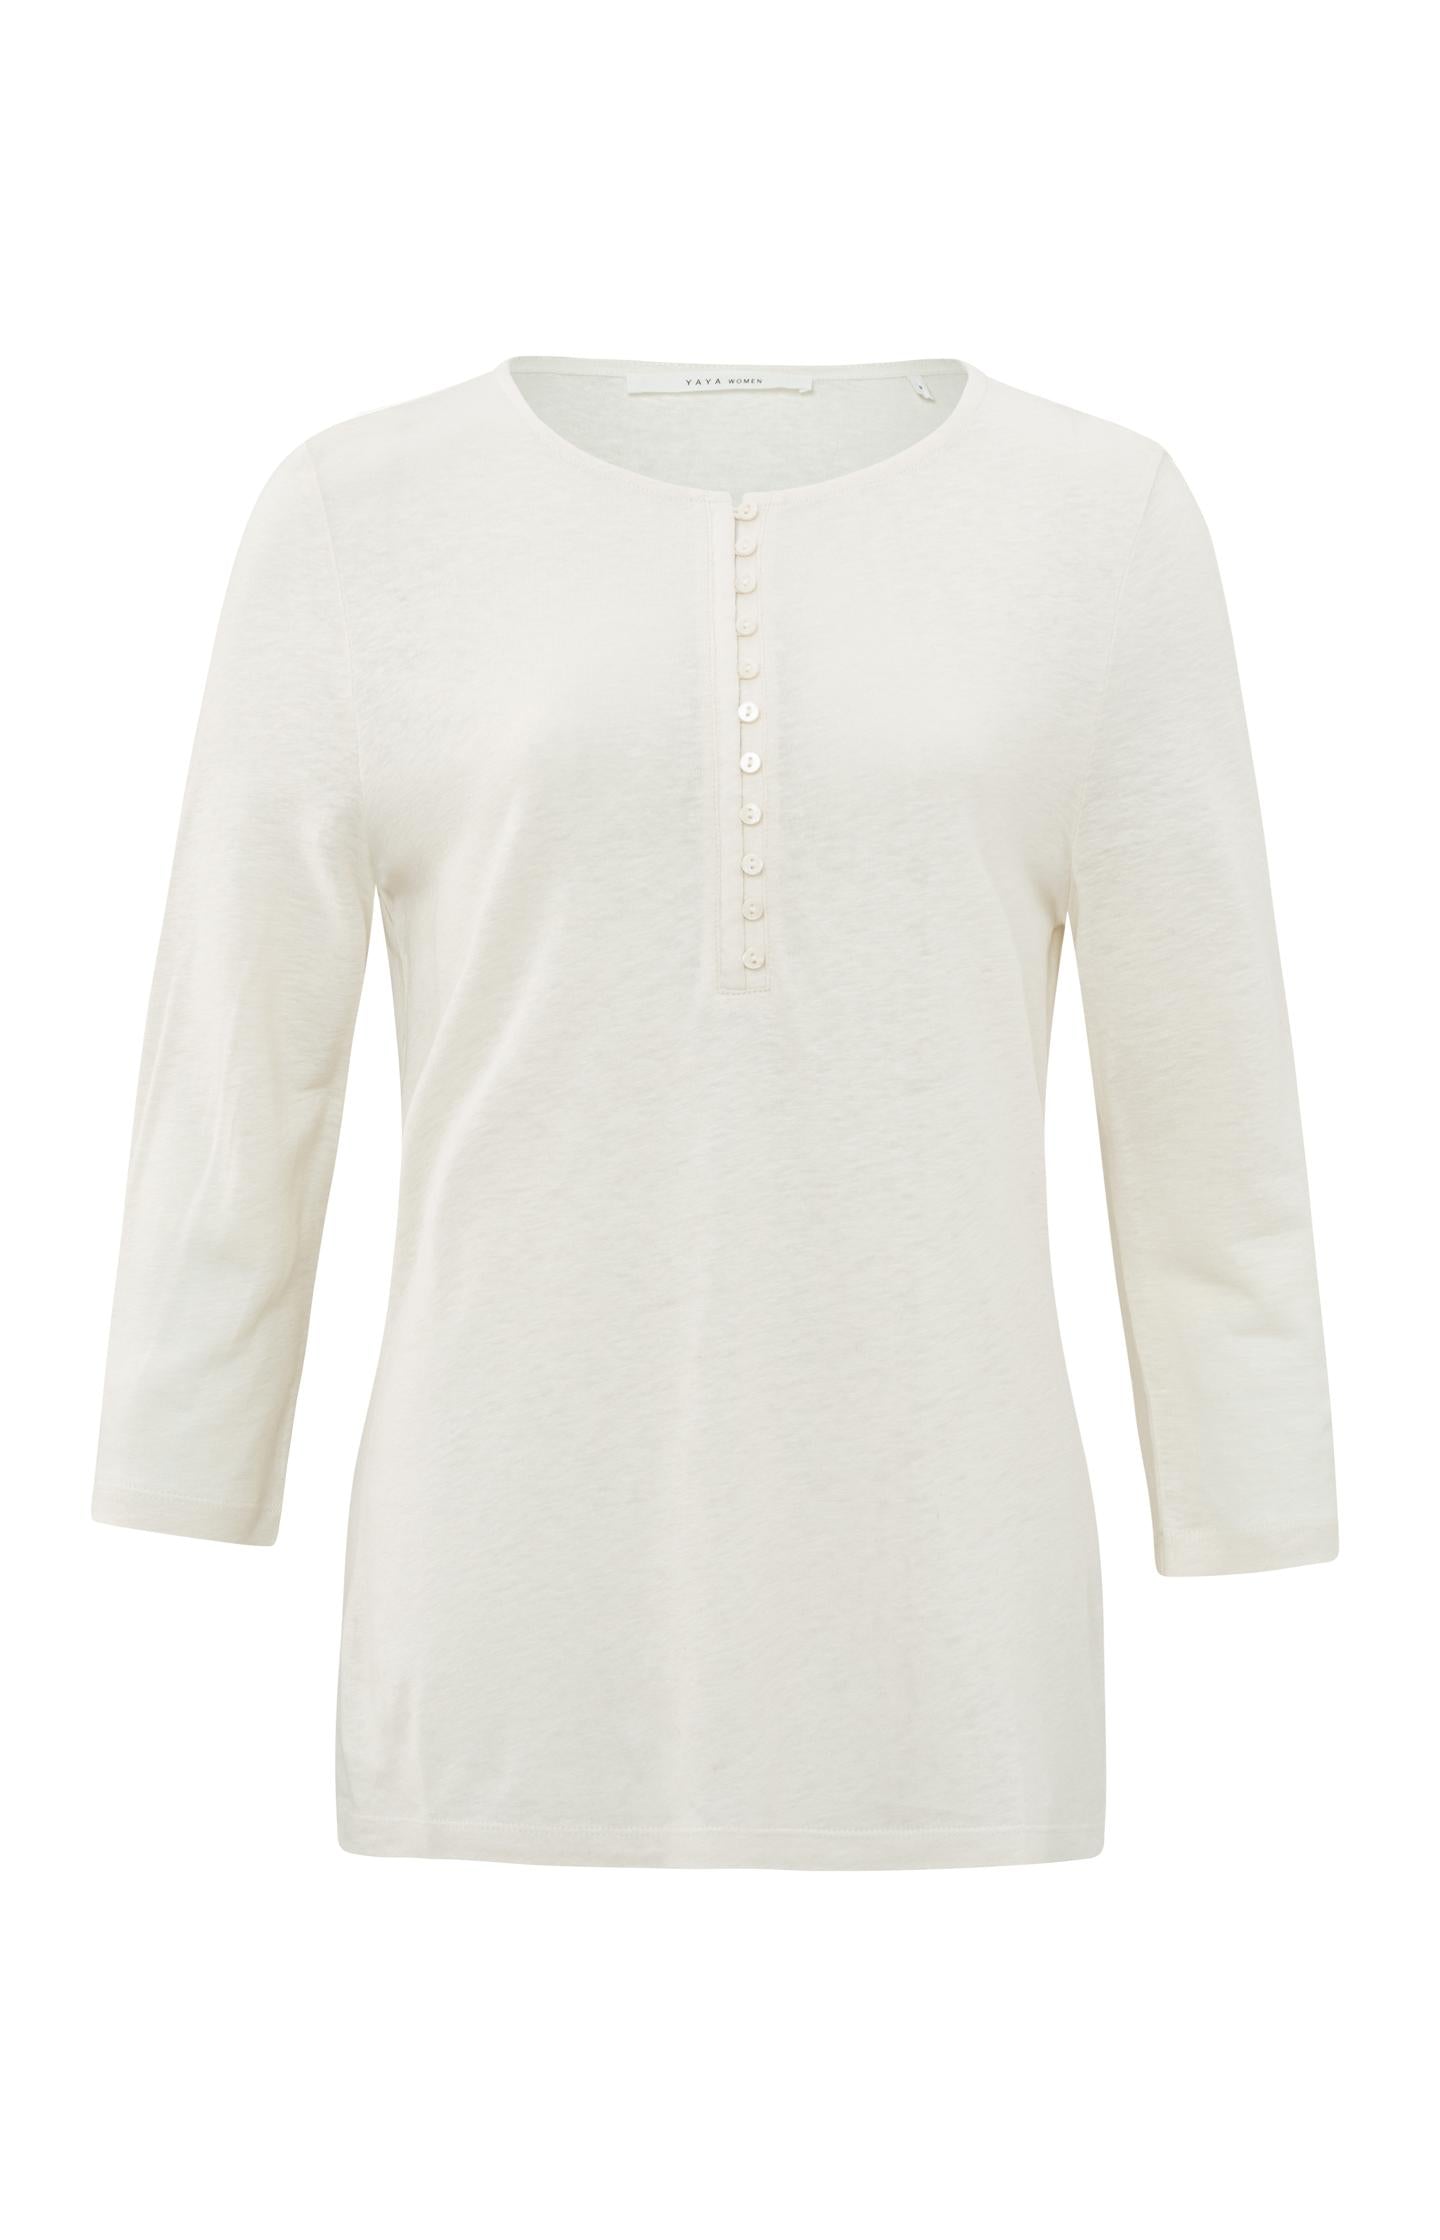 Shirt with 3/4 sleeves and round neck - Type: product